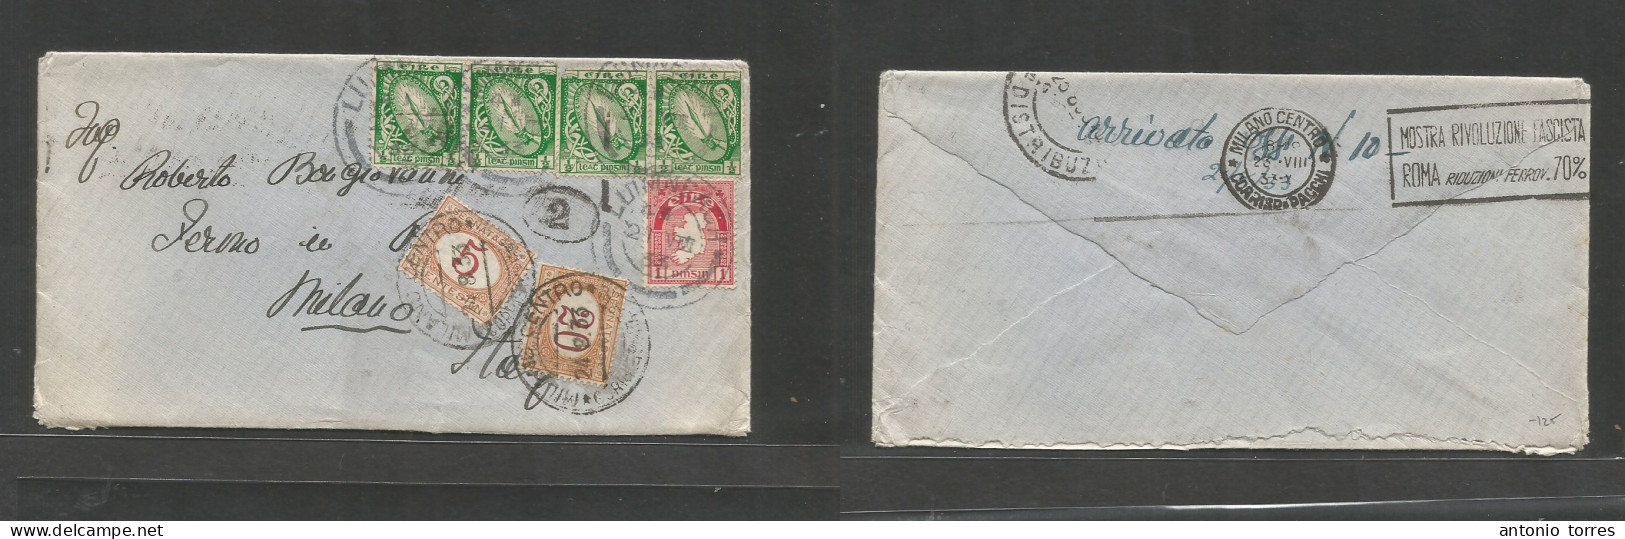 Eire. 1933 (21 Aug) Luimoneach - Italy, Milano, Italy (24 Aug). Multifkd Env At 3d Rate, Tied Cds + Taxed At Arrival At - Used Stamps